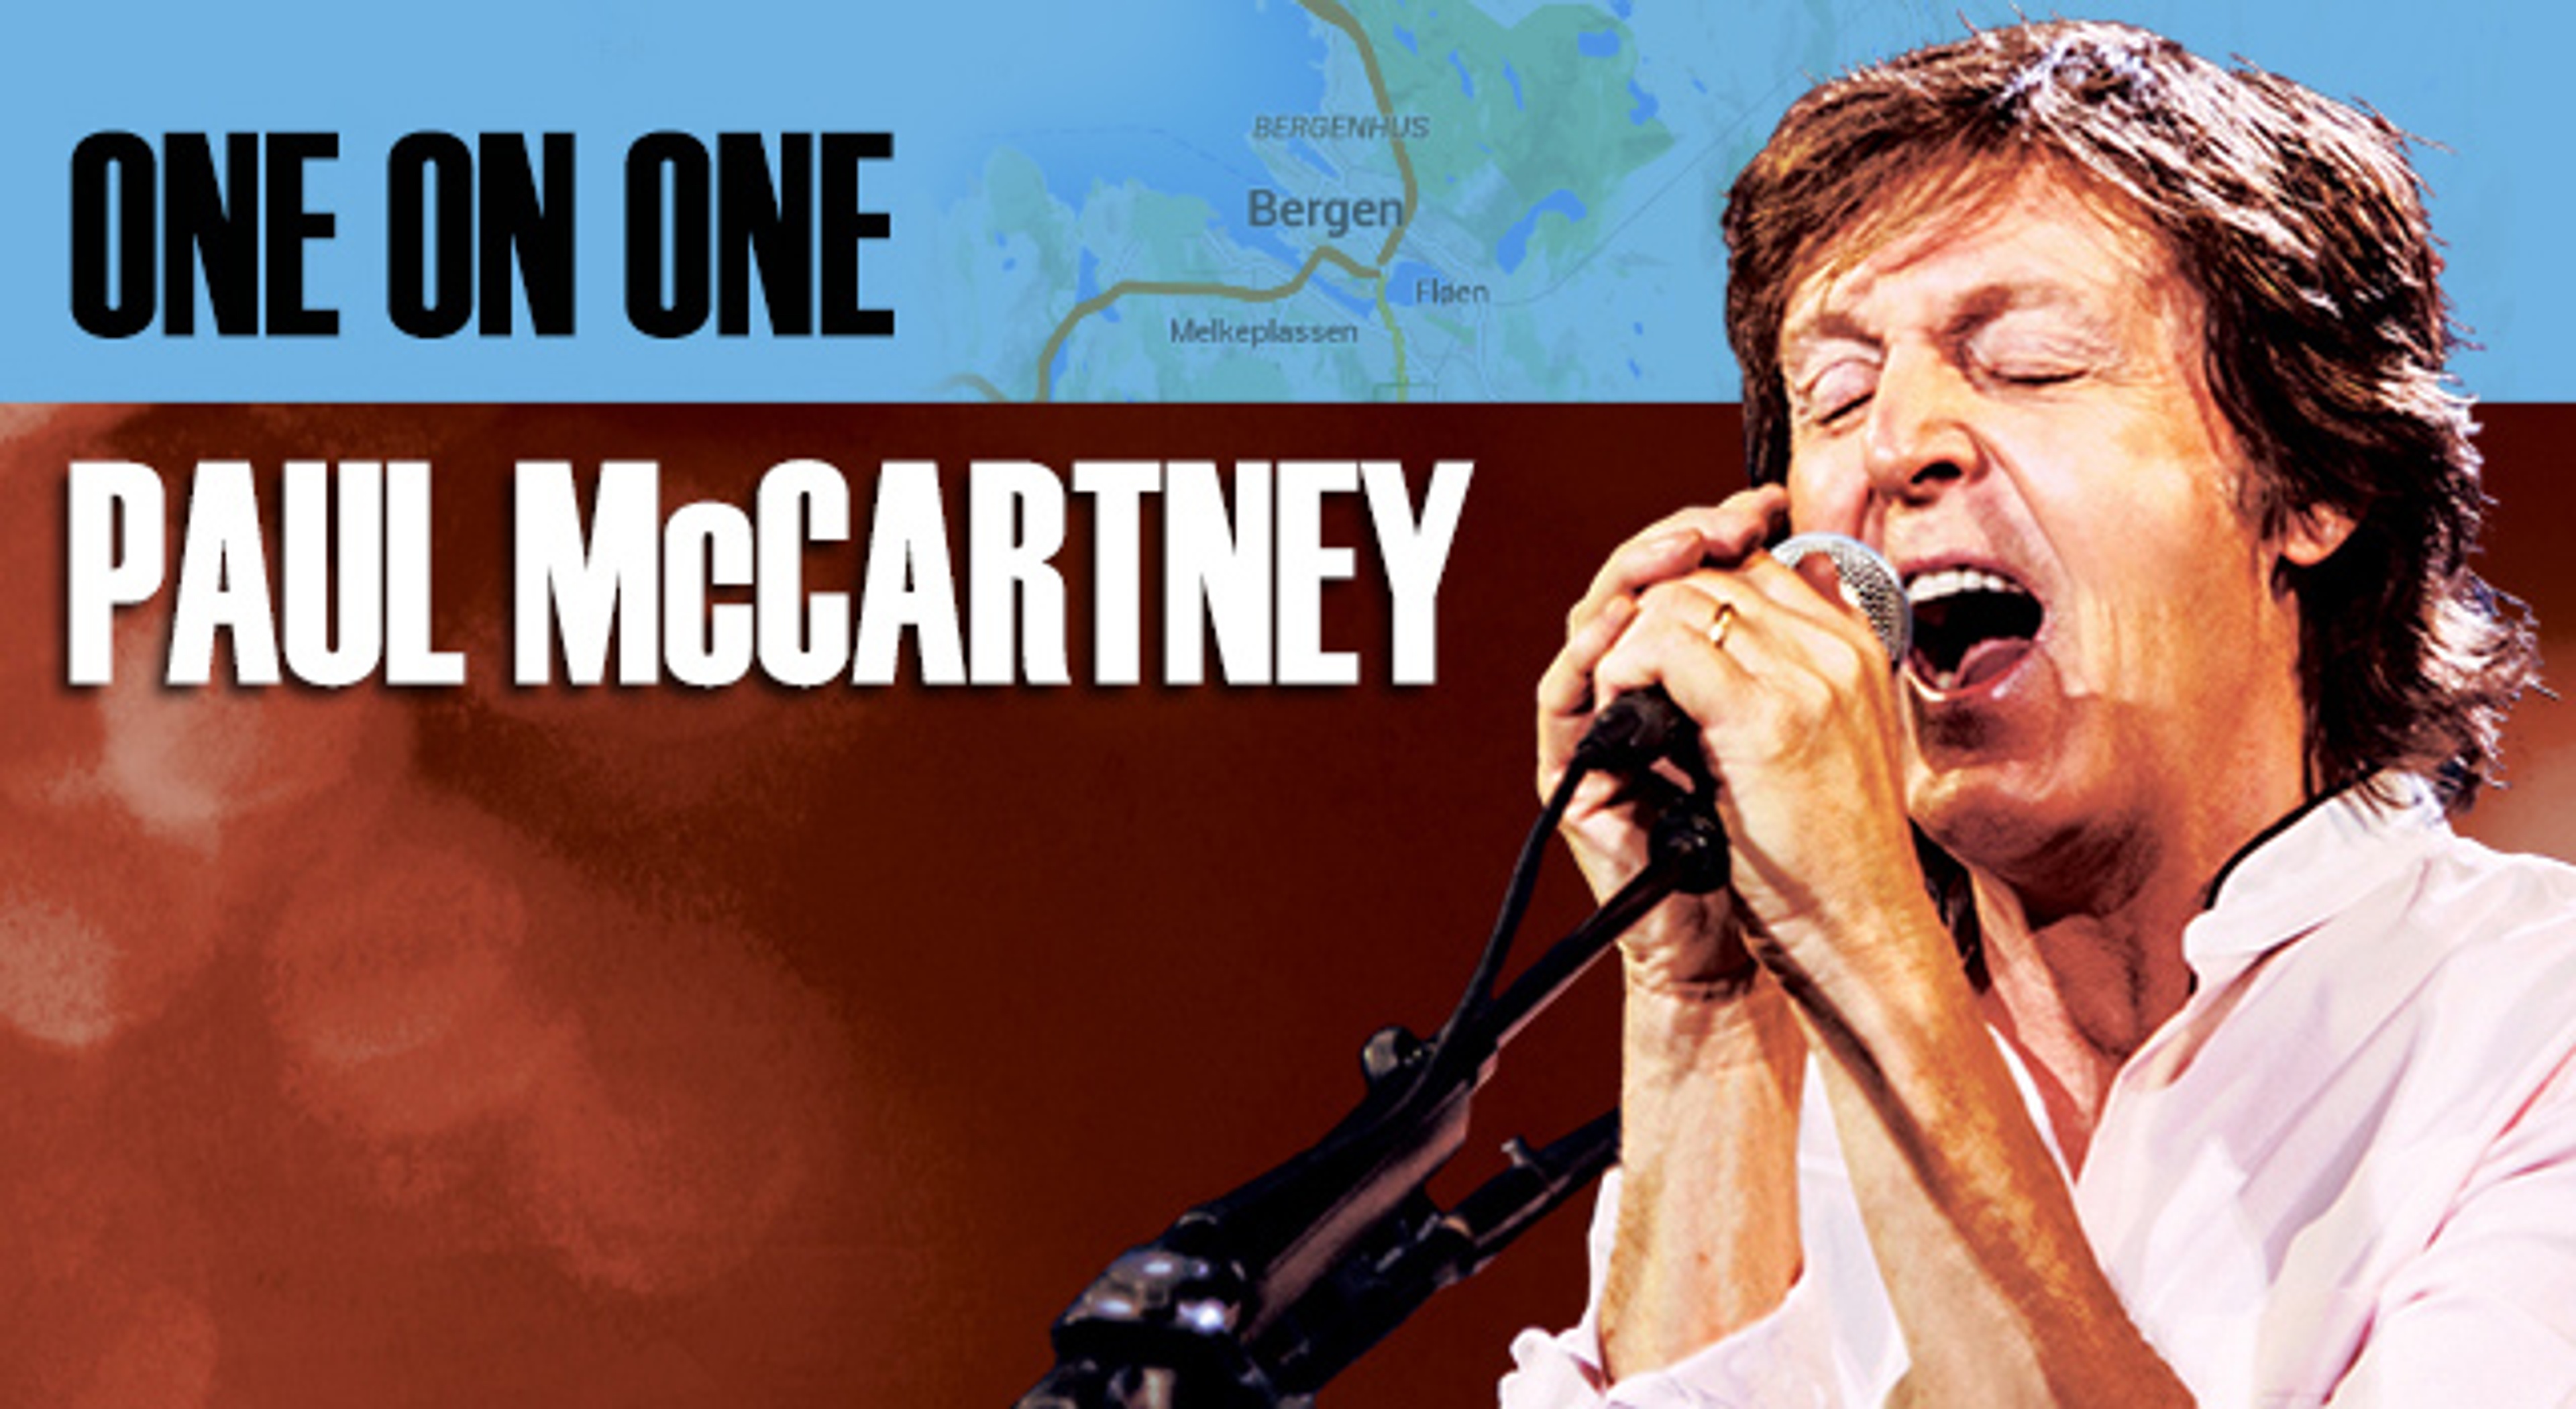  Paul Takes His 'One On One' Tour To Norway